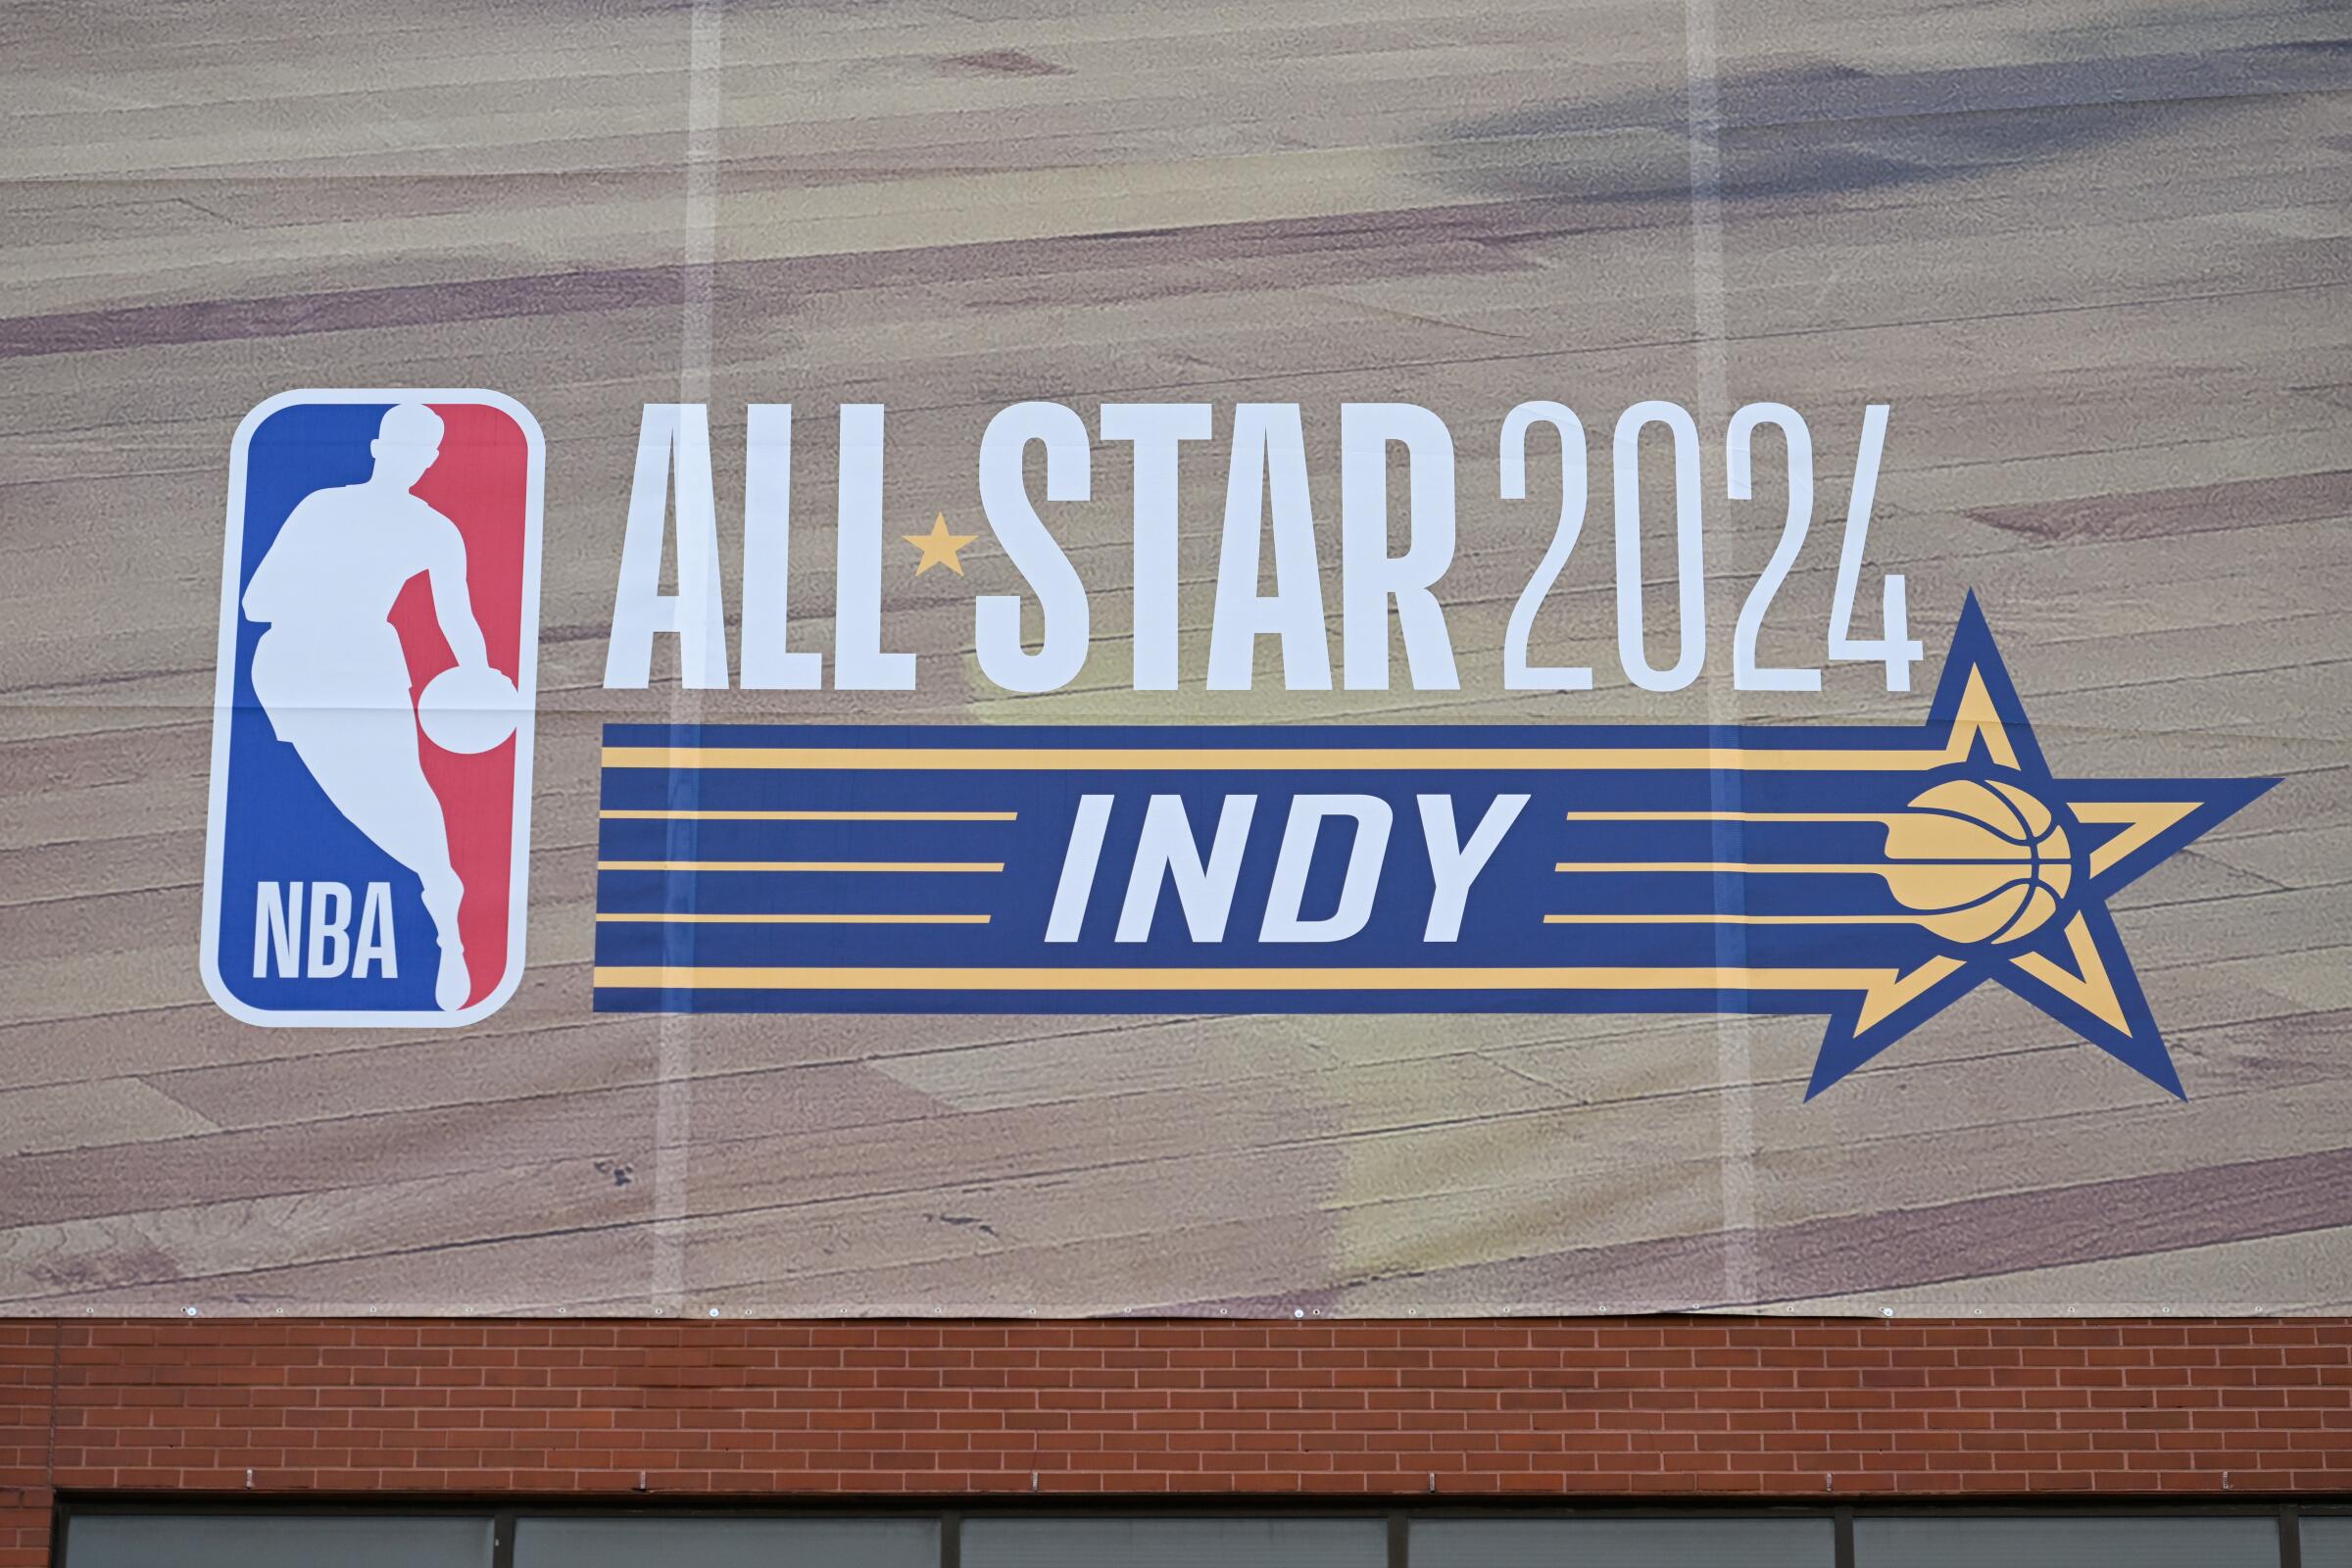 NBA All-Star Game signage is displayed on the side of a building in Indianapolis.